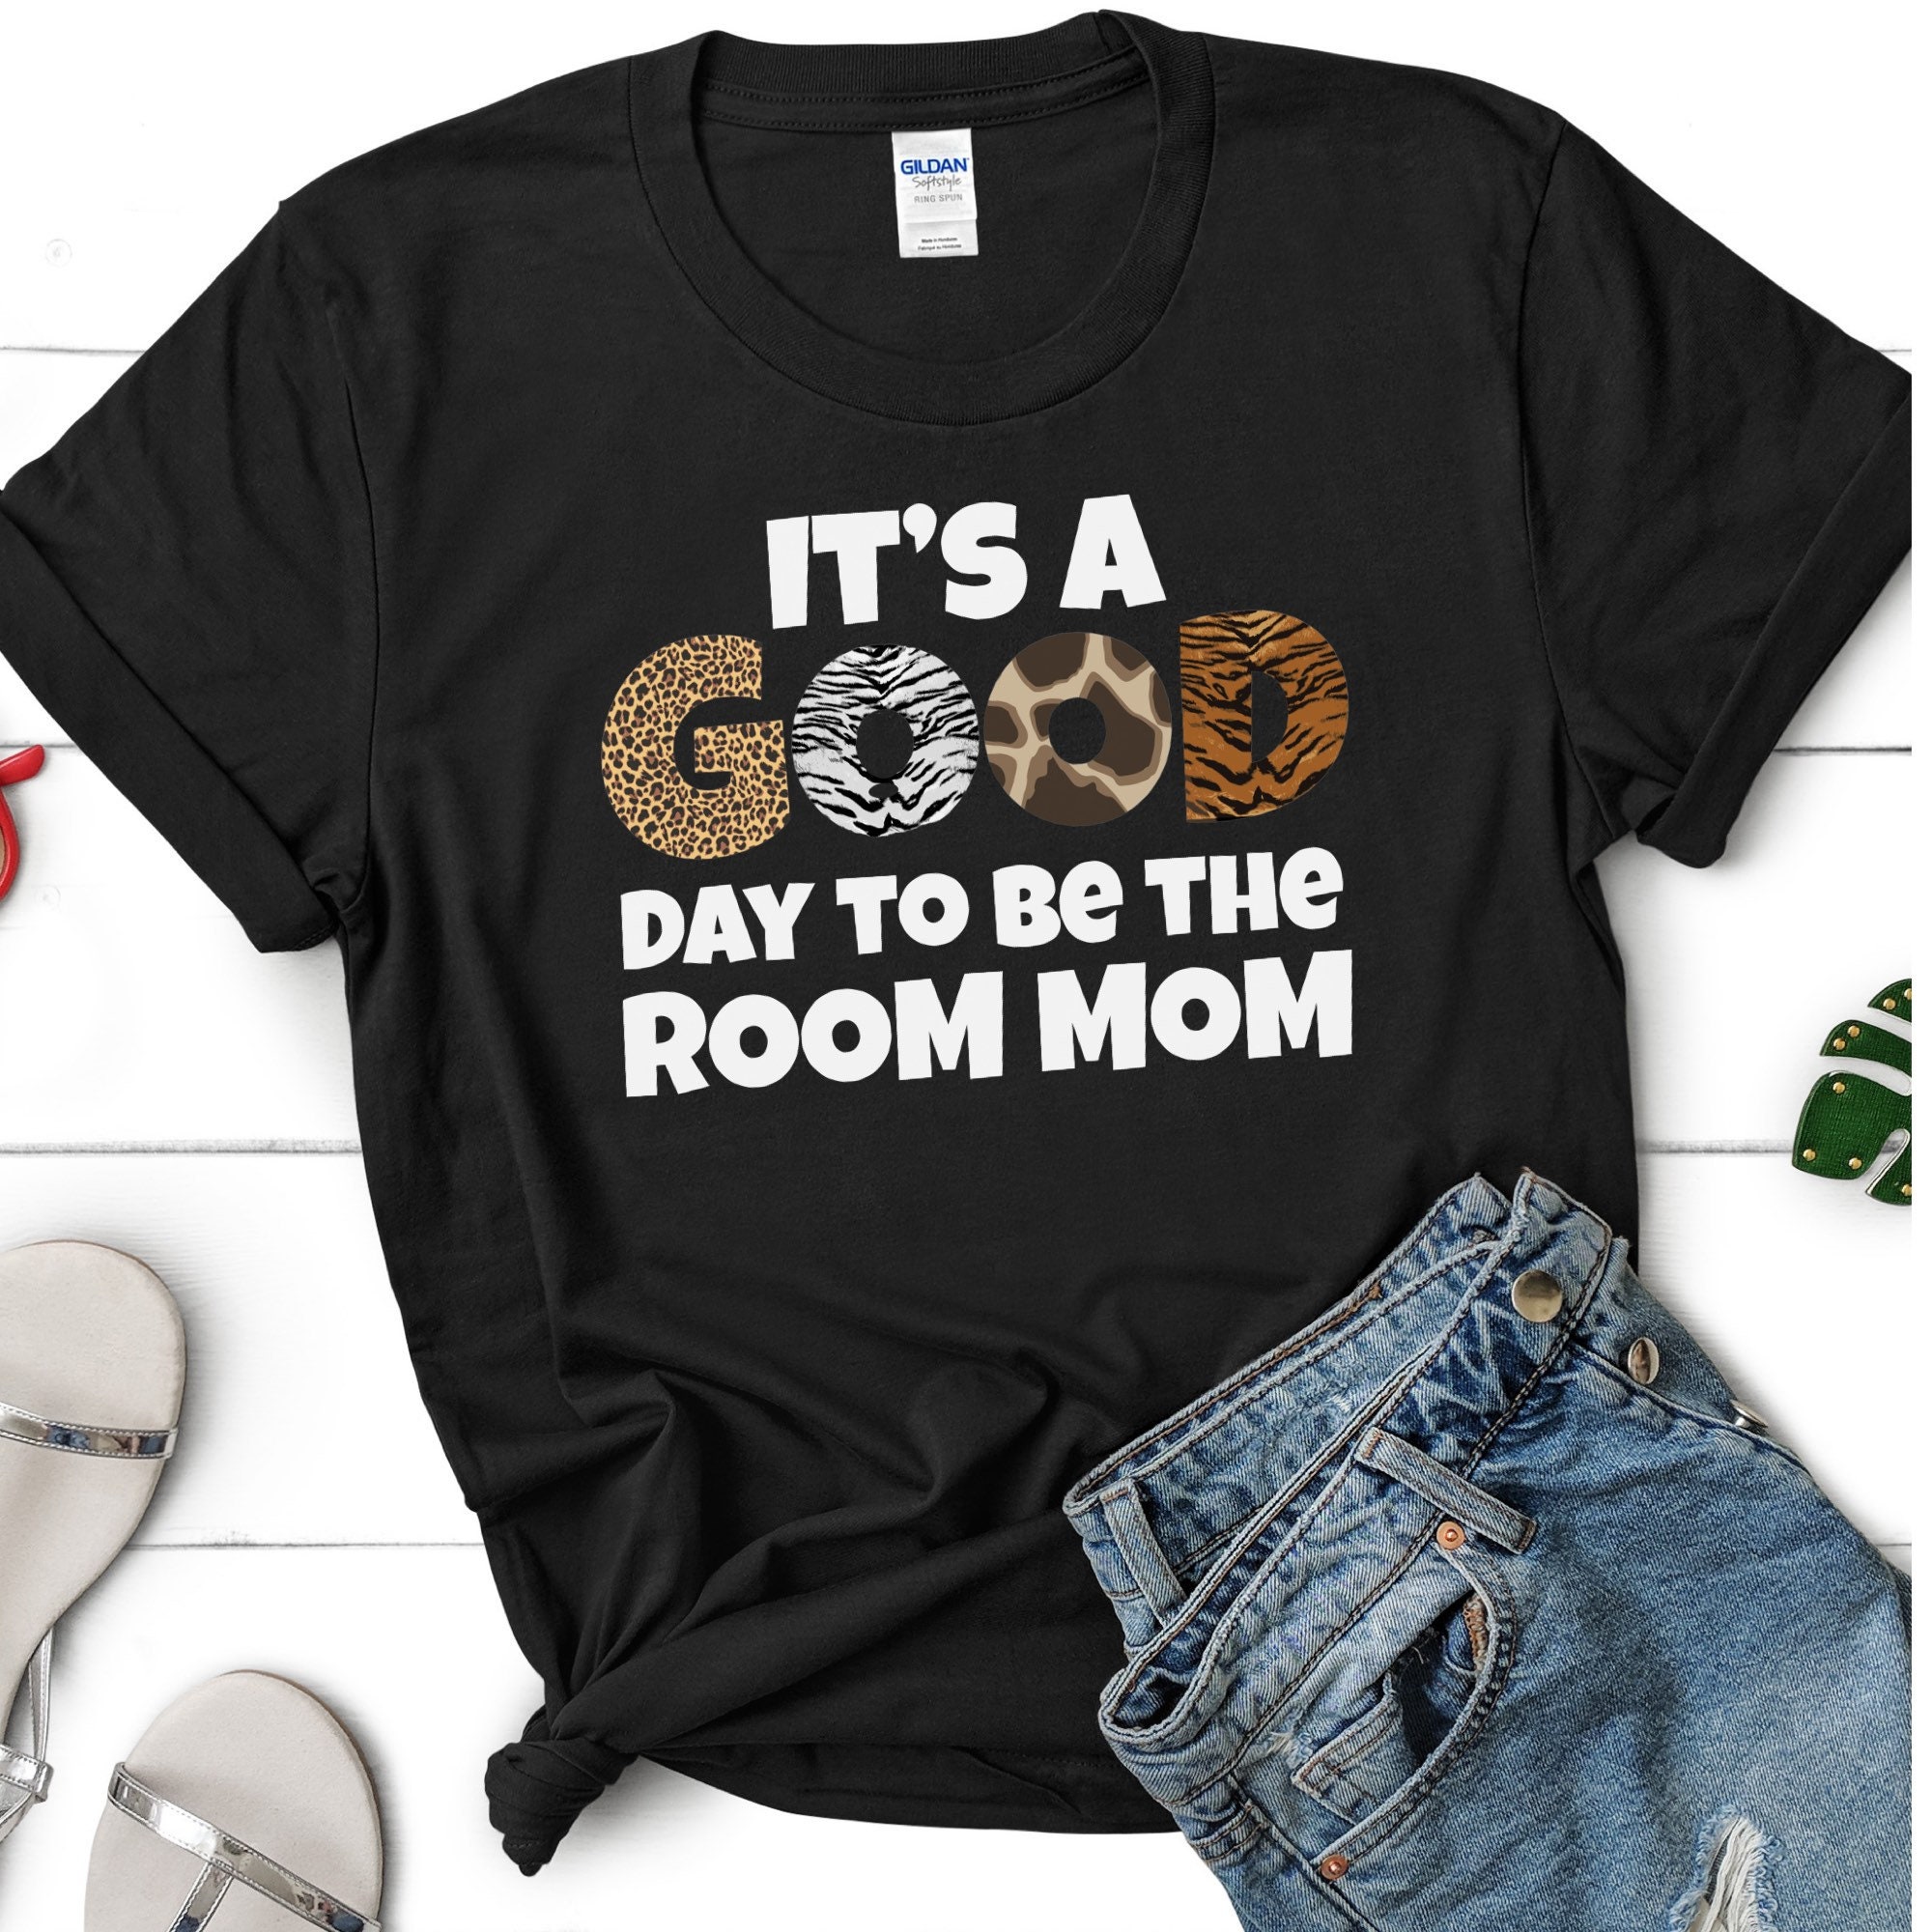 Then I Bought a Group Gift (Day 6) - TheRoomMom